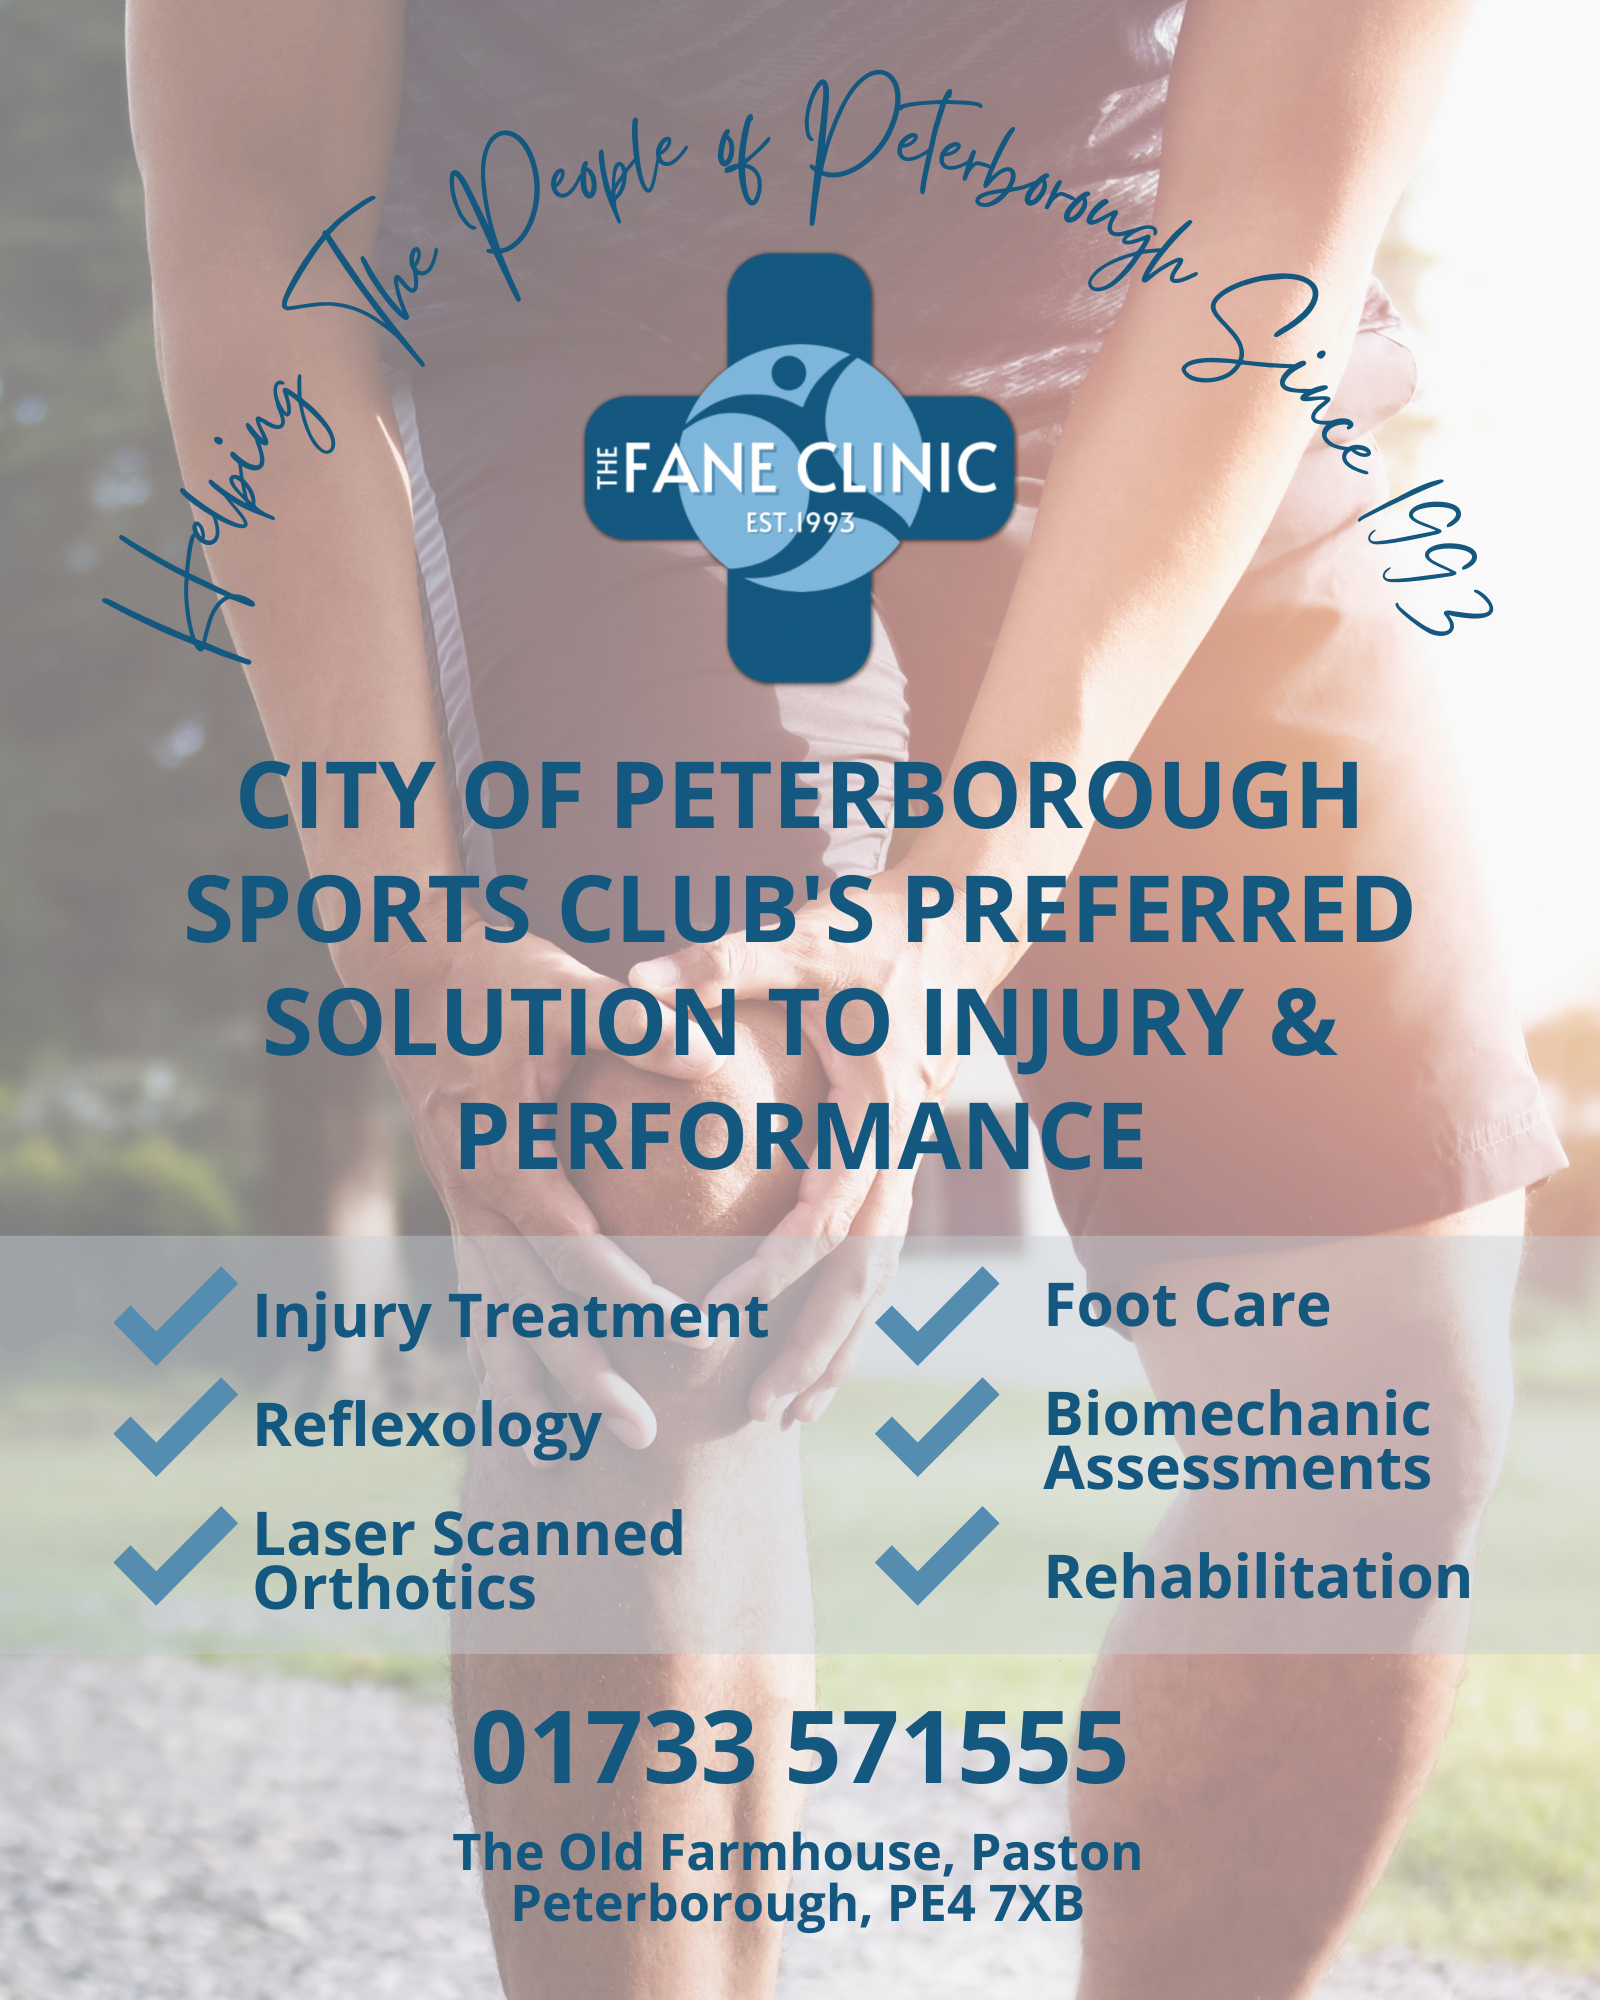 The Fane Clinic Partners with City of Peterborough Sports Club